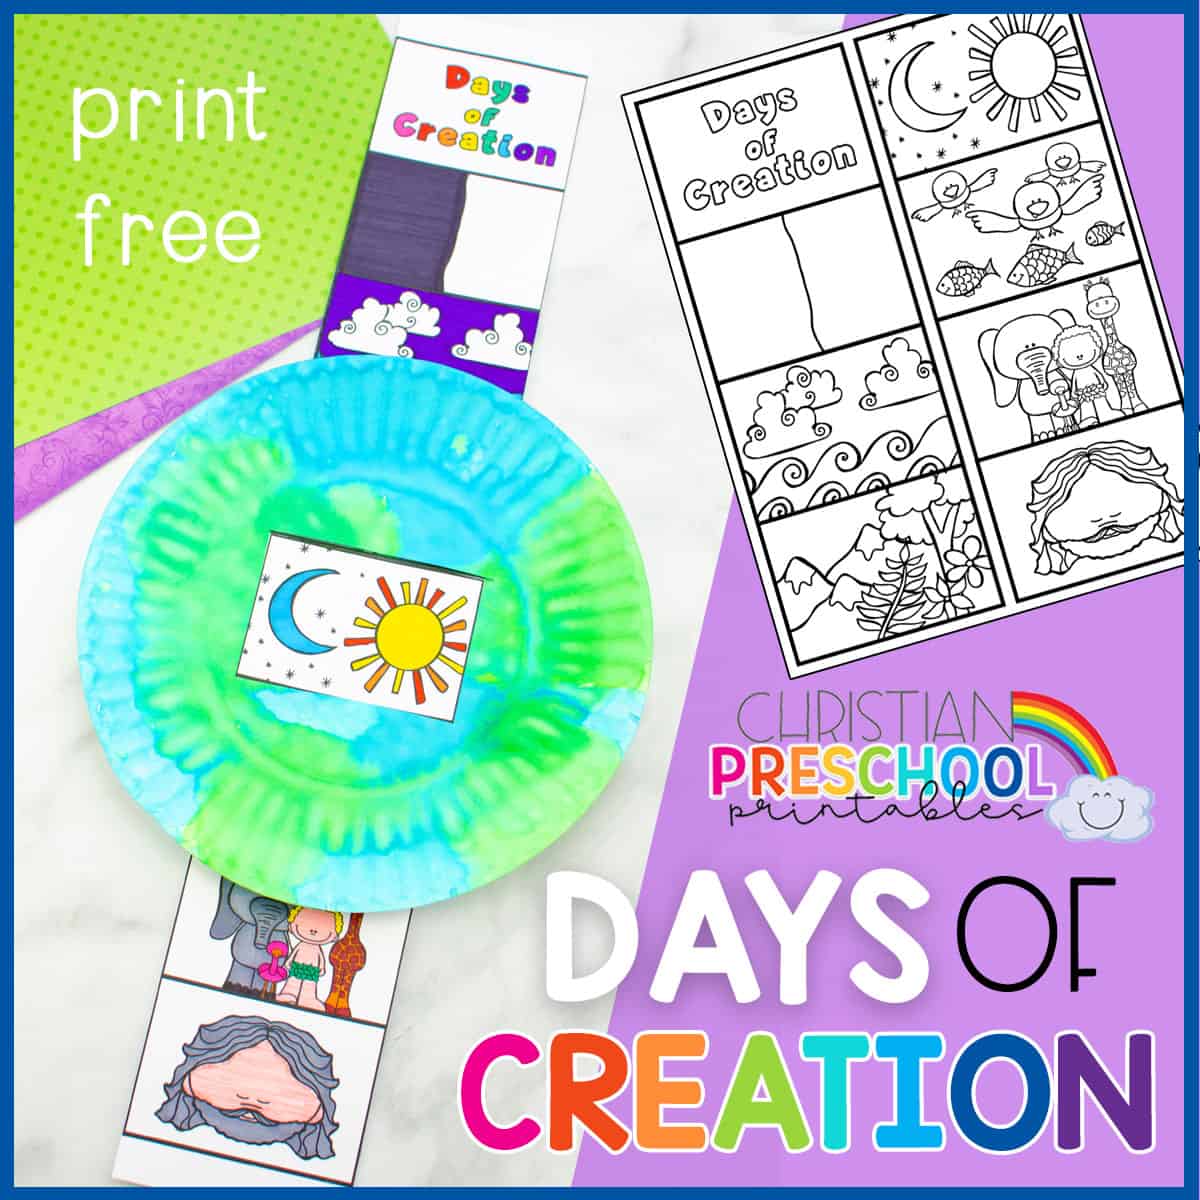 crafts-for-young-women-preschool-bible-lessons-crafts